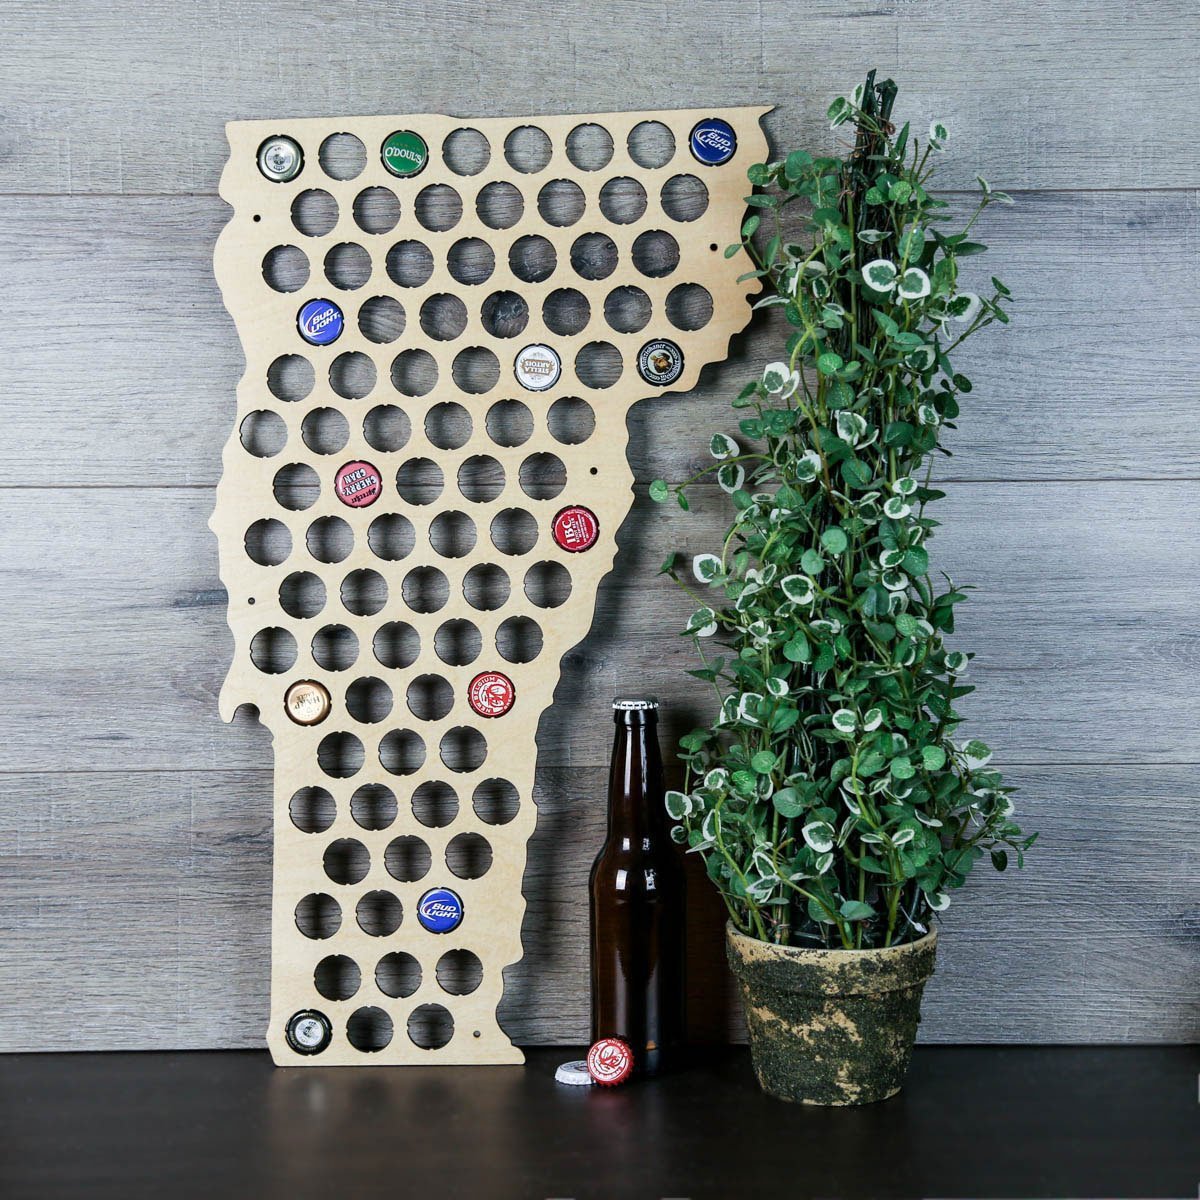 Torched Products Beer Bottle Cap Holder Vermont Beer Cap Map (777581822069)